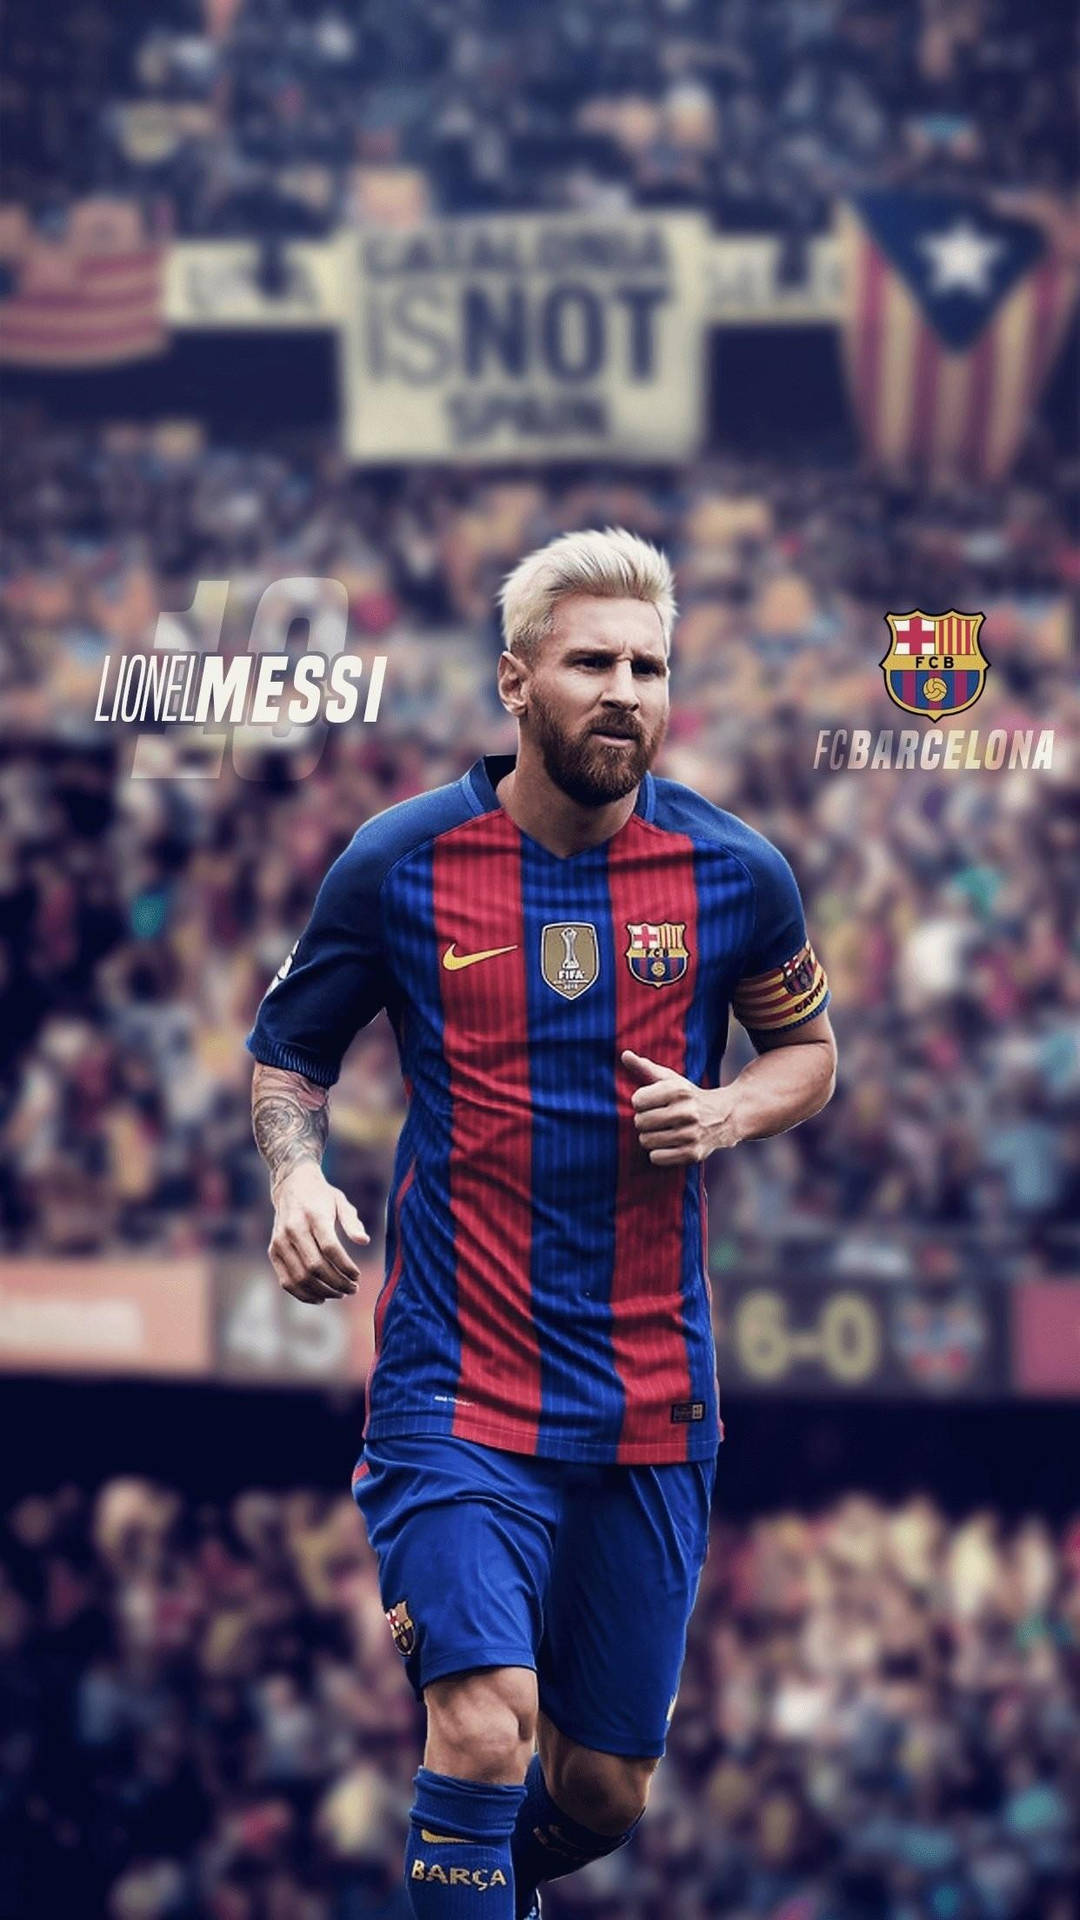 Top 999+ Messi Barcelona Wallpaper Full HD, 4K✅Free to Use